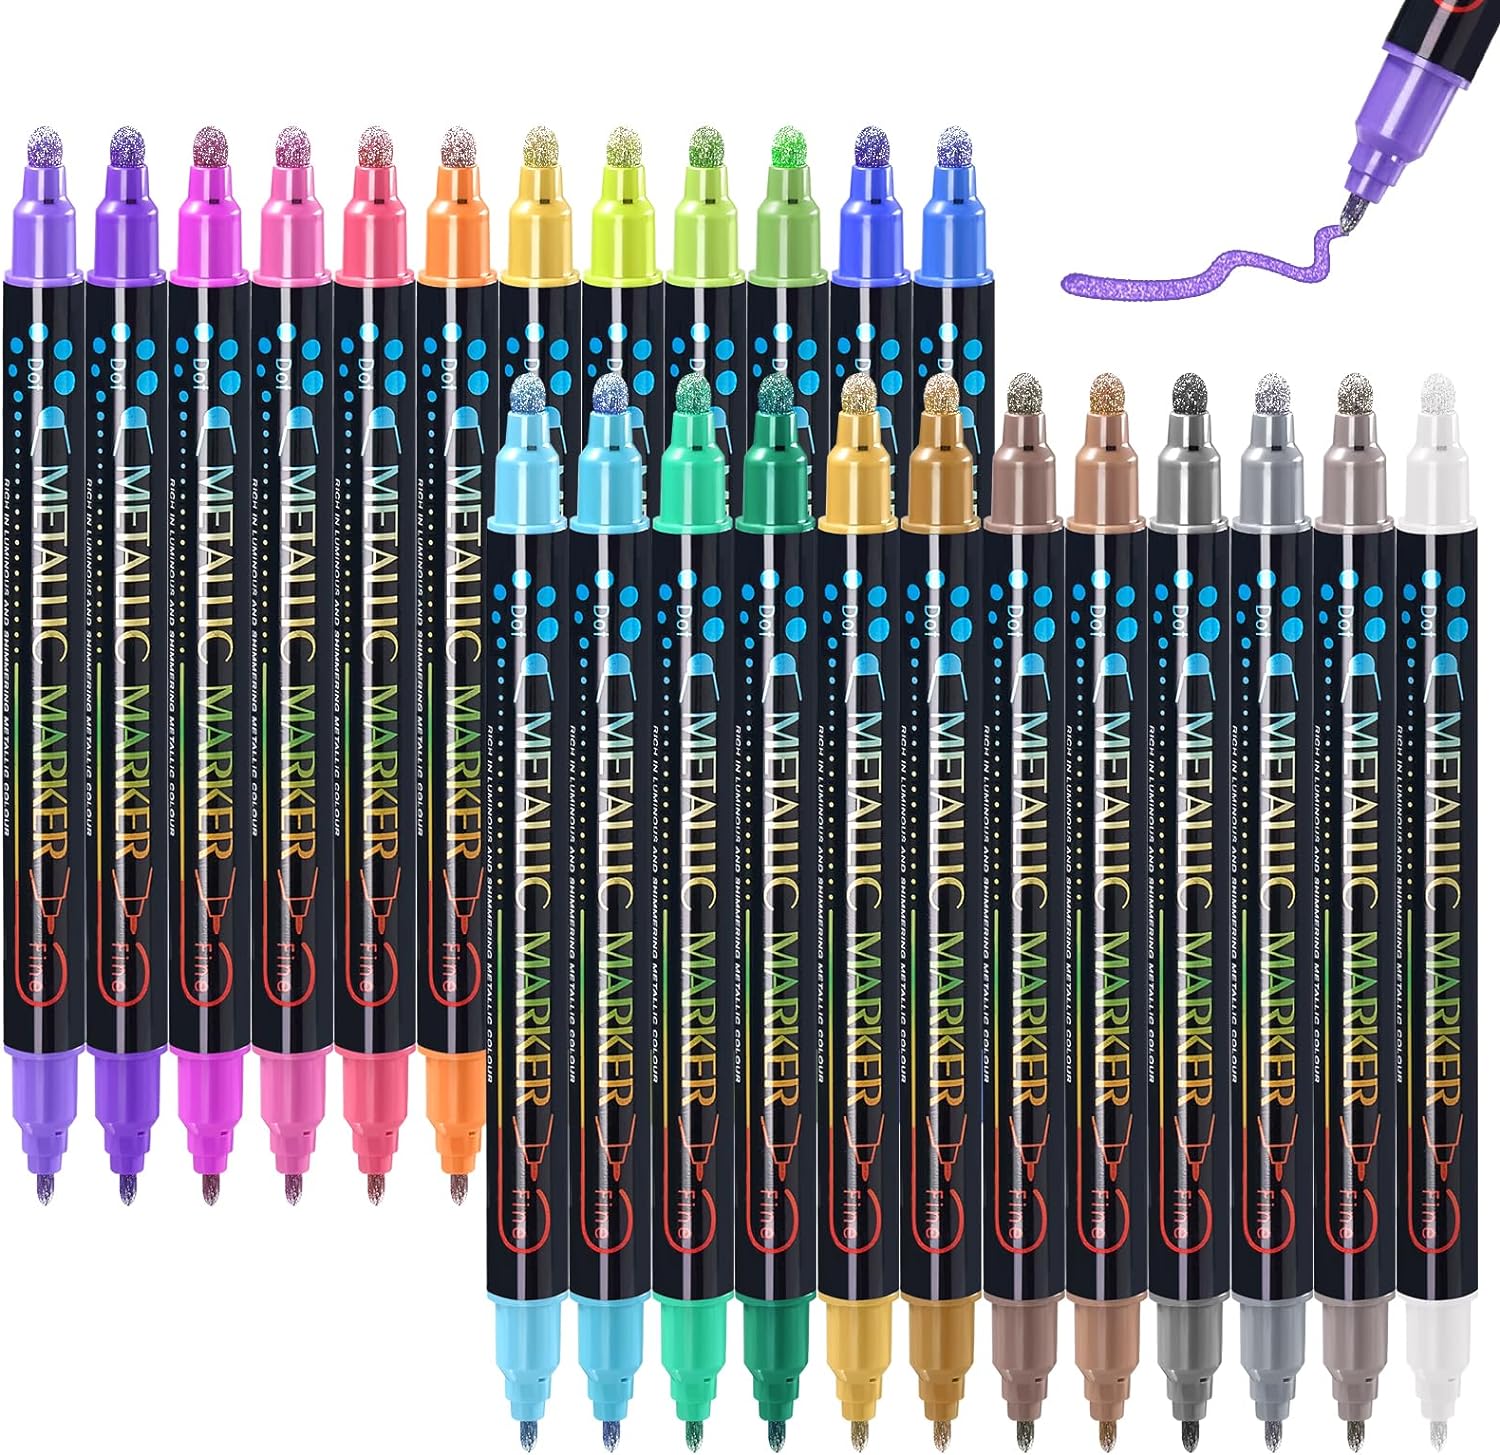 Guangna 24 Colors Metallic Paint Twin Marker Pens with Dot and Fine Tip